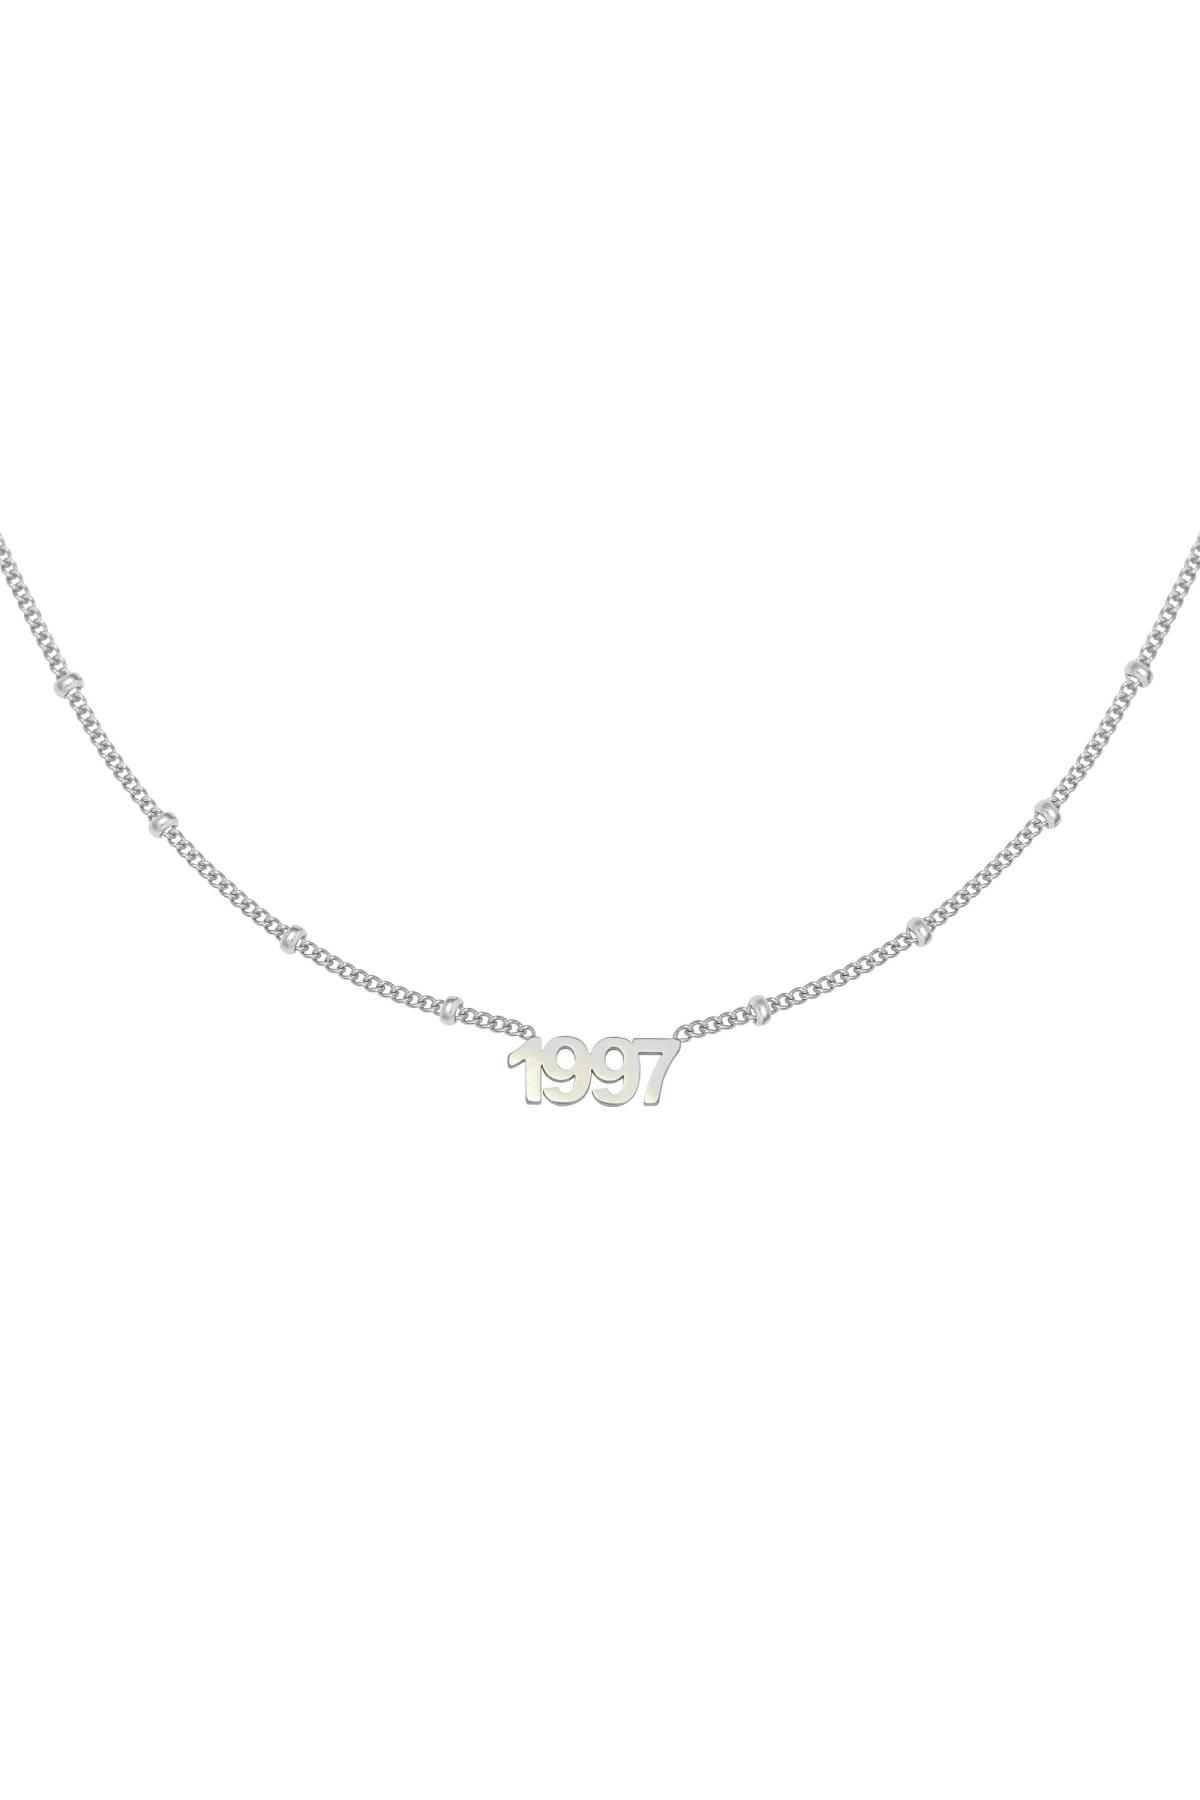 Necklace Year 1997 Silver Stainless Steel h5 